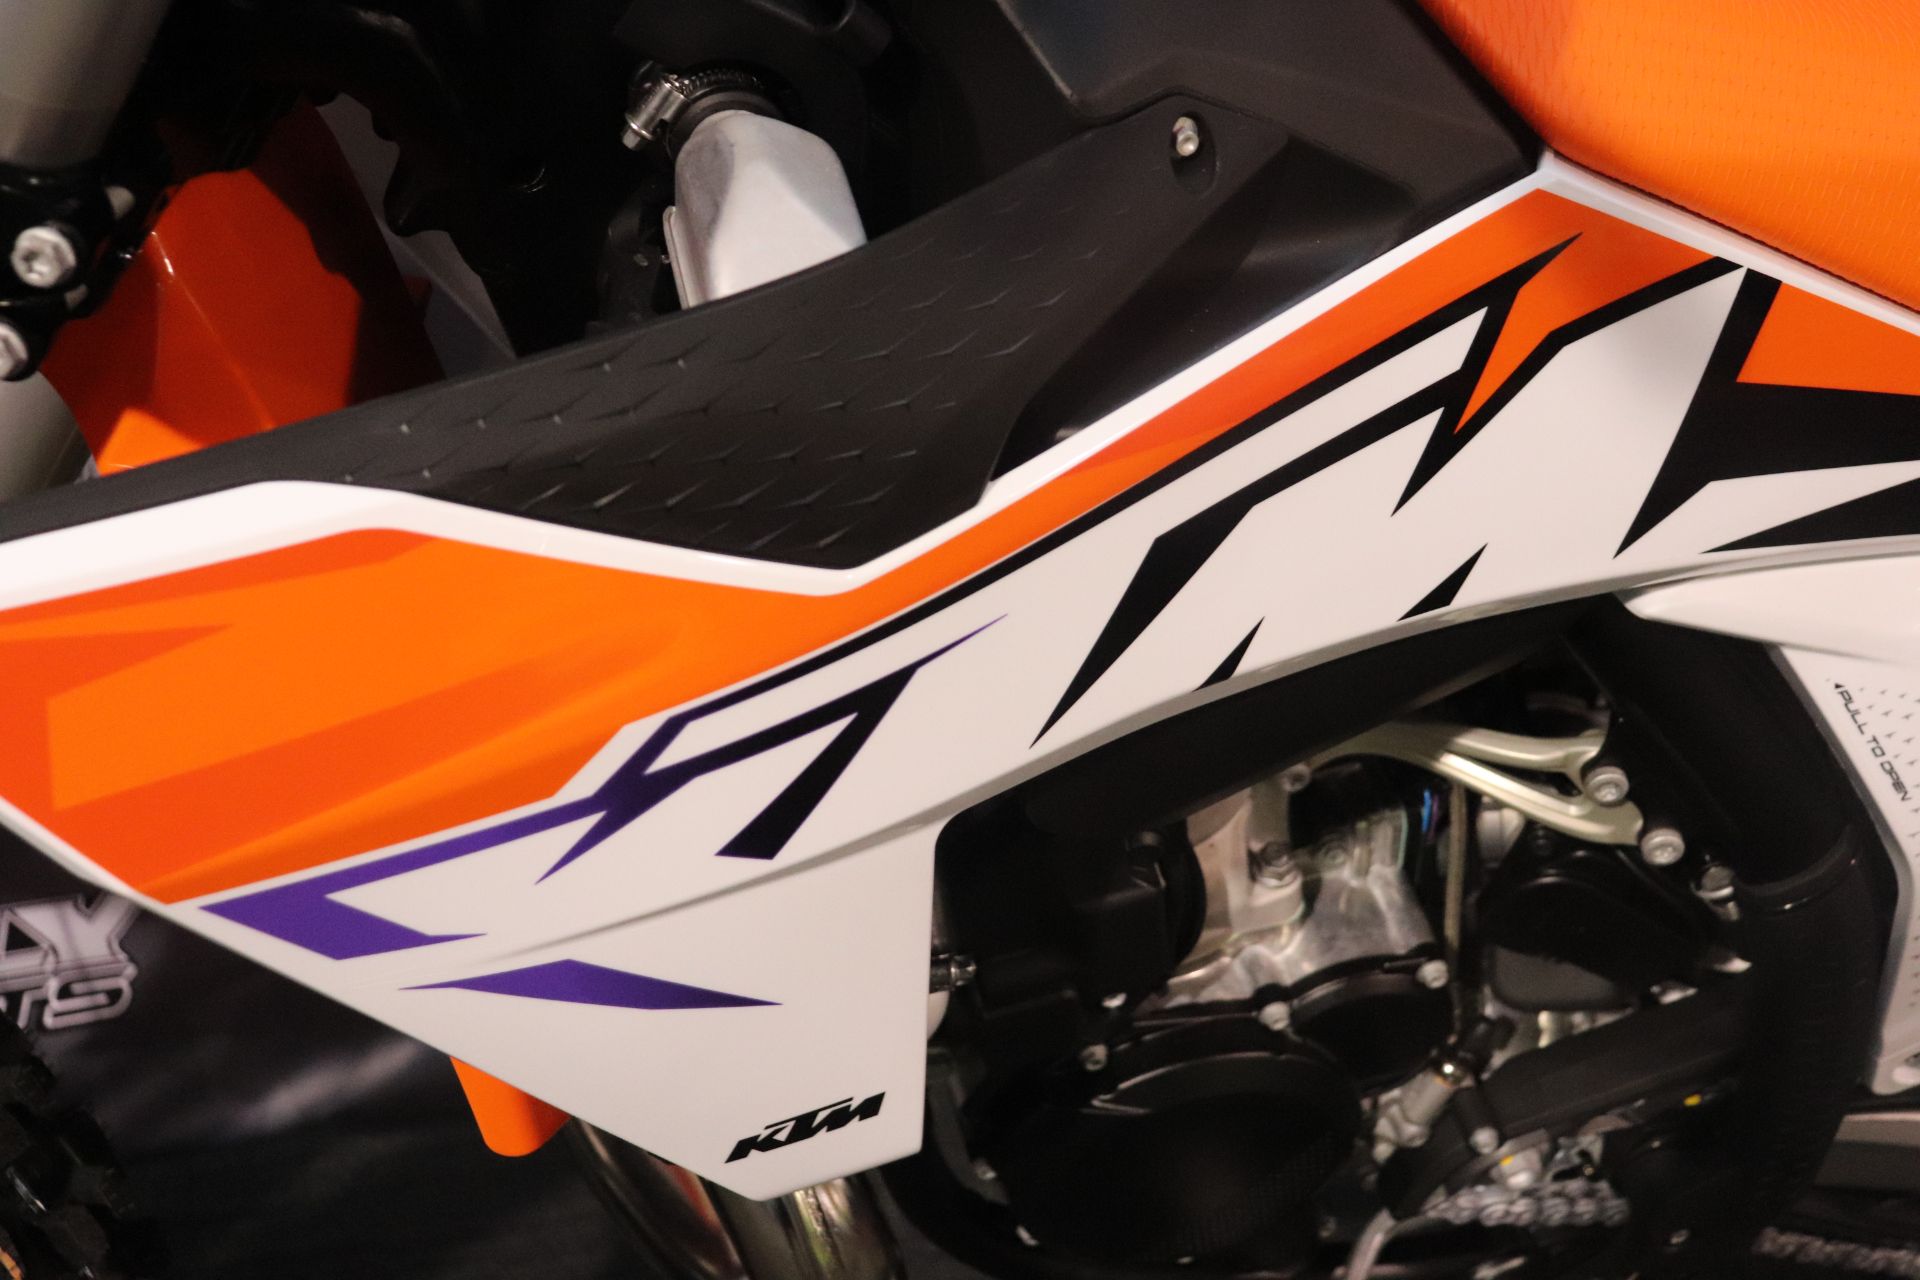 2023 KTM 300 XC in Vincentown, New Jersey - Photo 3